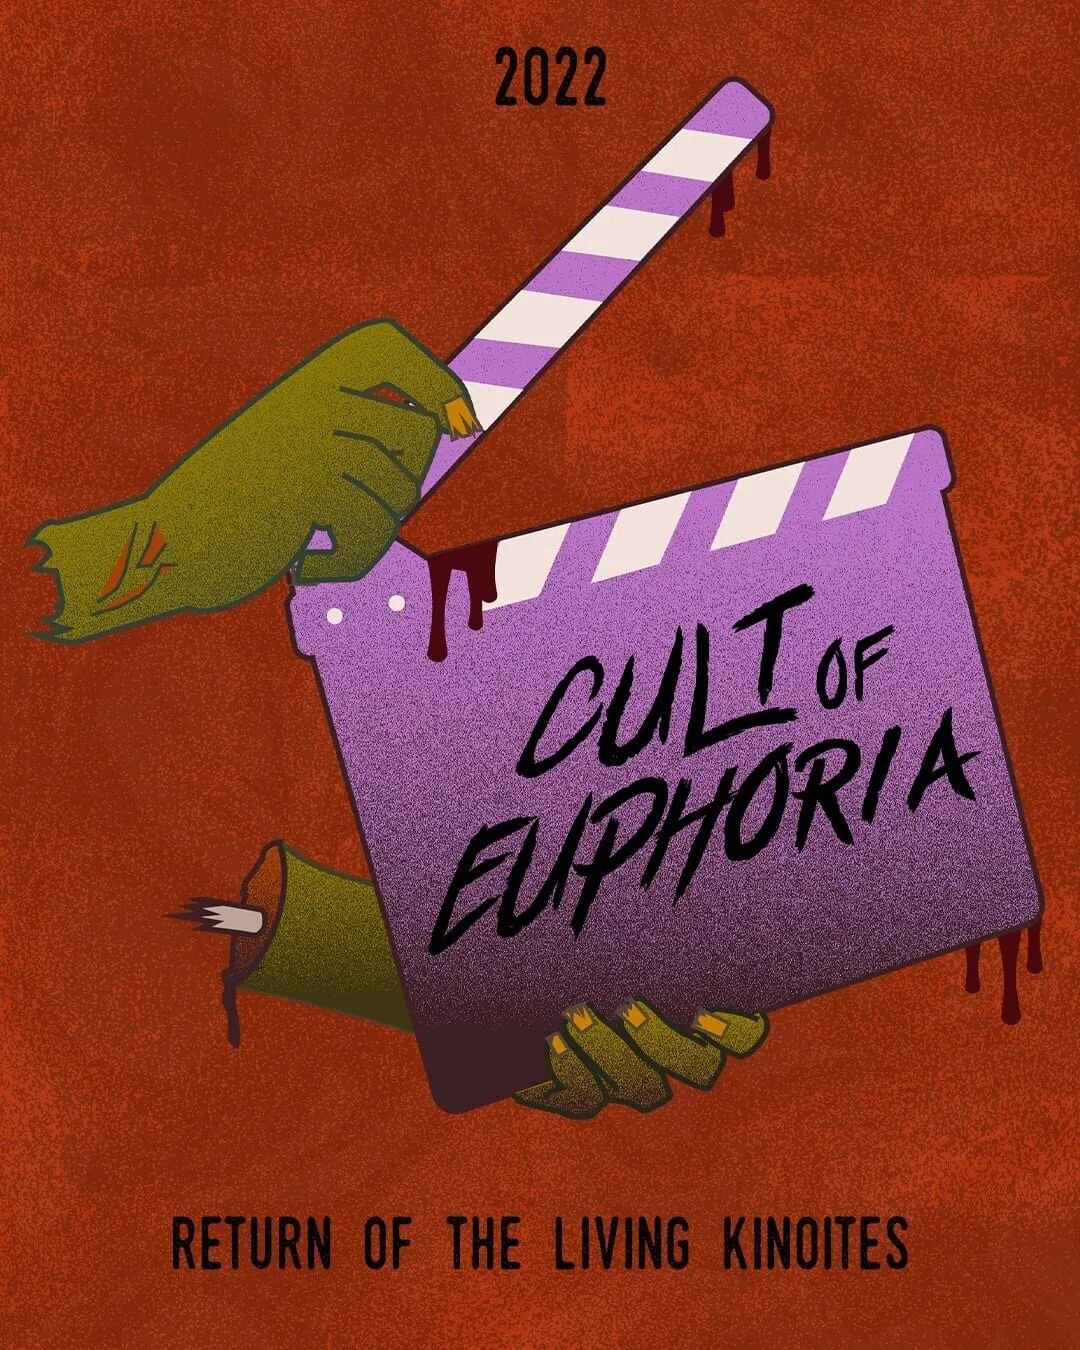 Cult of Euphoria is pulsing with life after two years of online slumber! Taking place in Helsinki 4.-6.11. 🧟 🎬 

Registration form in bio 👻

Thank you @saara.png for the awesome graphics ✨
.
.
.
.
#kinokabaret #kinoeuphoria #shortfilms #guerrillaf